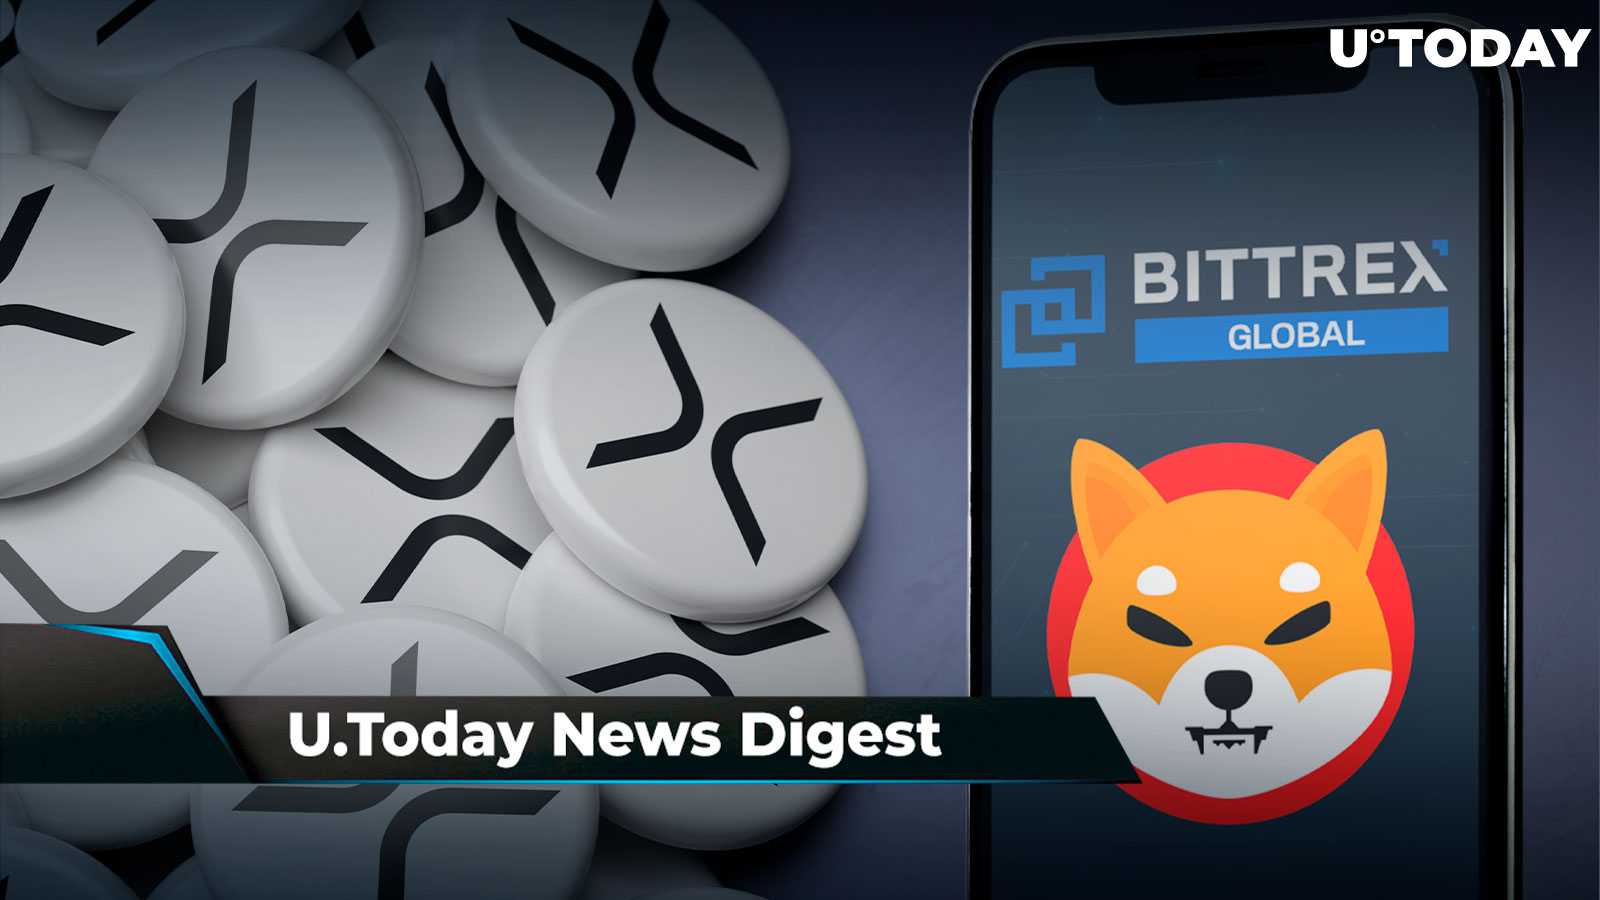 BTC Analysts Predicts “Big Short Squeeze,” SHIB Gets Listed by Bittrex, Jed McCaleb Keeps His Last 5 Million XRP to Himself: Crypto News Digest by U.Today